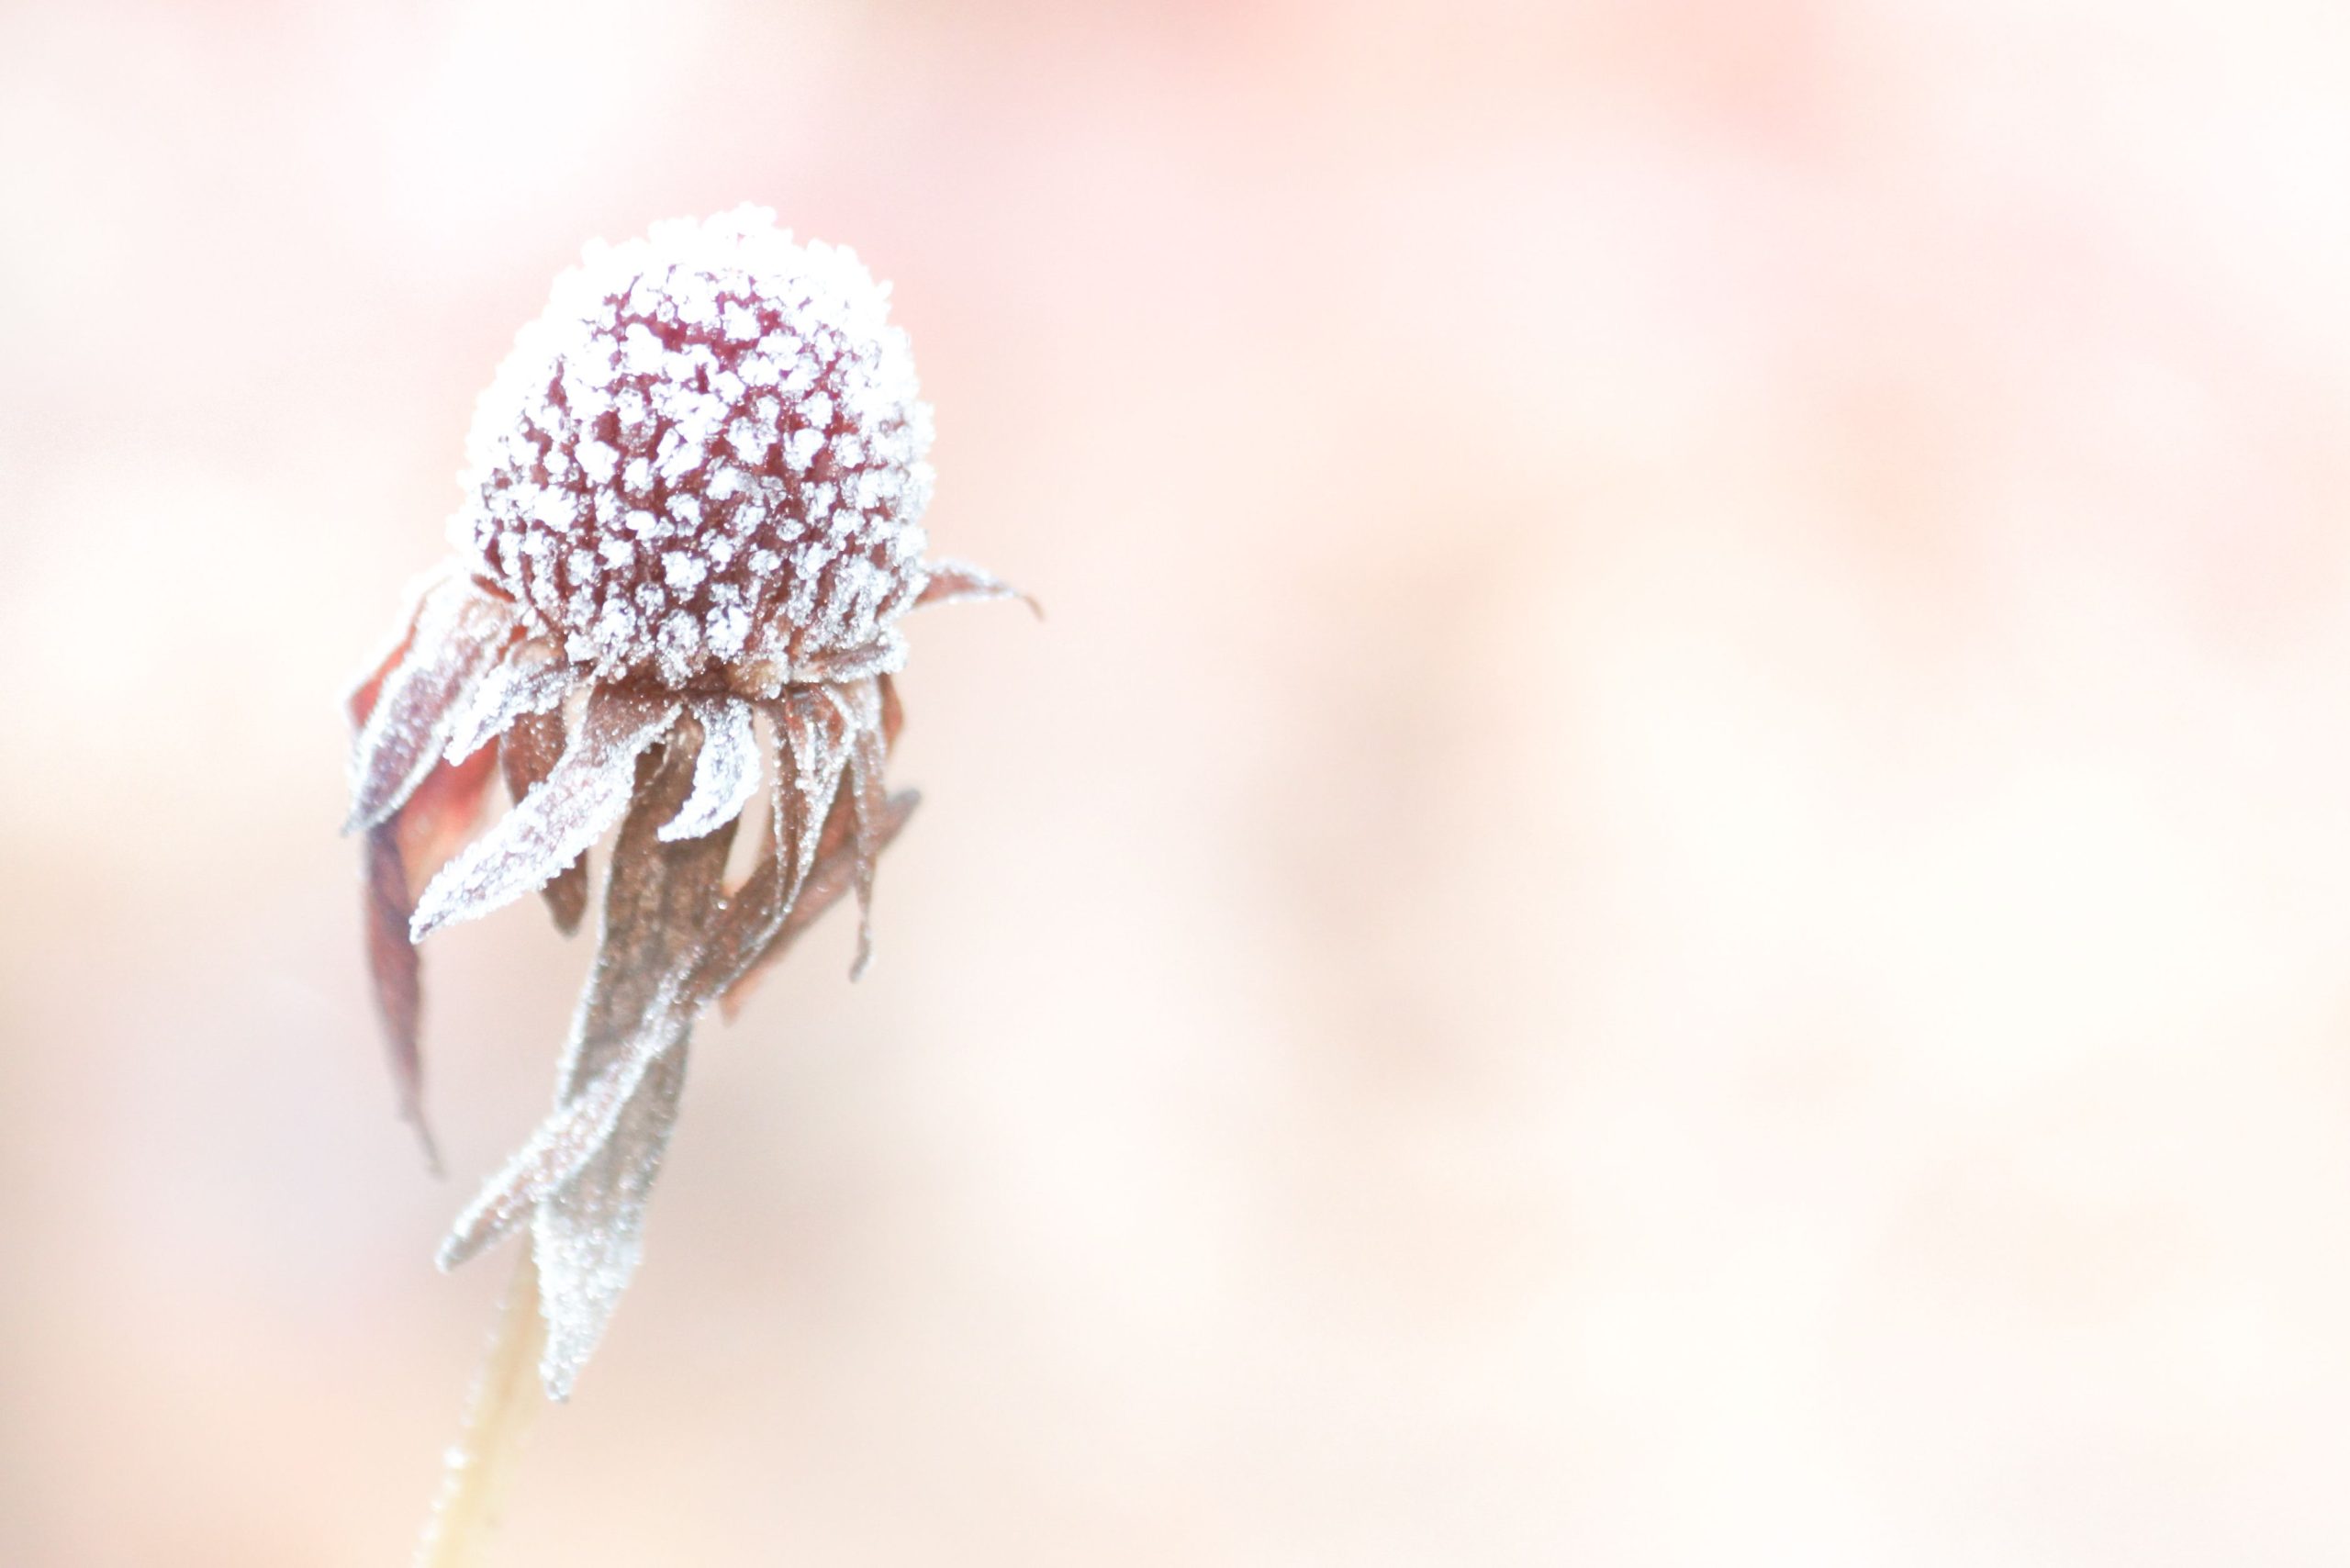 frosted over flower against a blurred background